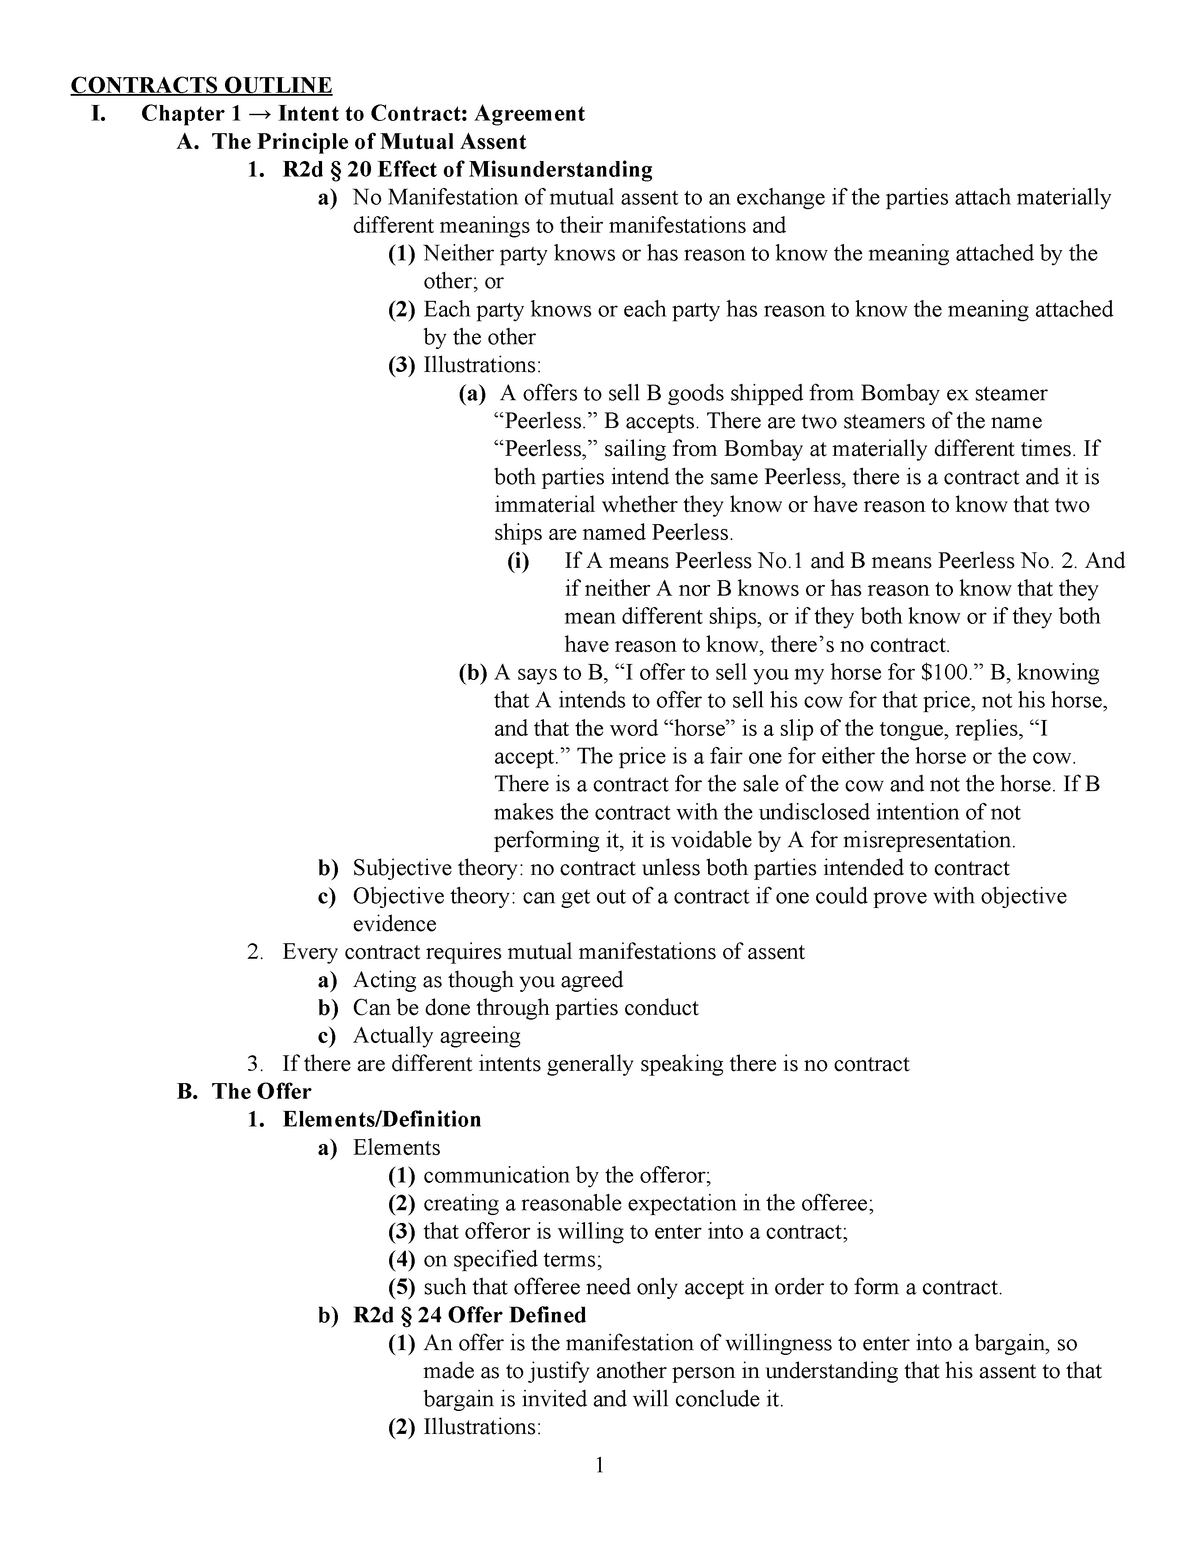 Contracts Outline (Anderson syllabus) - CONTRACTS OUTLINE I. Chapter 1 ...